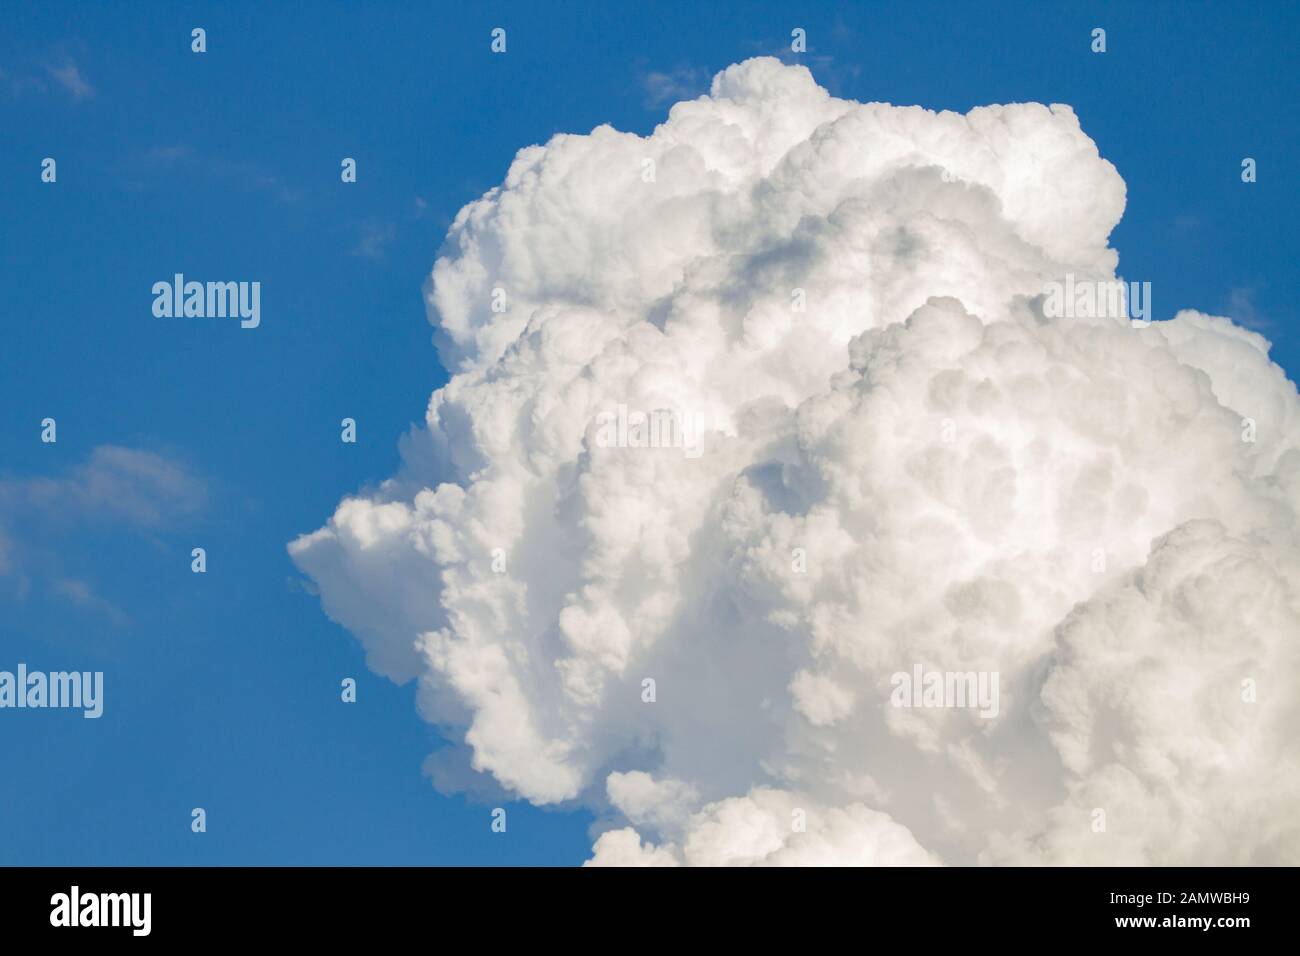 cumulonimbus white powerful rainstorm and thunderstorm.vertical mushroom strong cumulus .as dy warms up clouds form and can cause heavy rain and thund Stock Photo